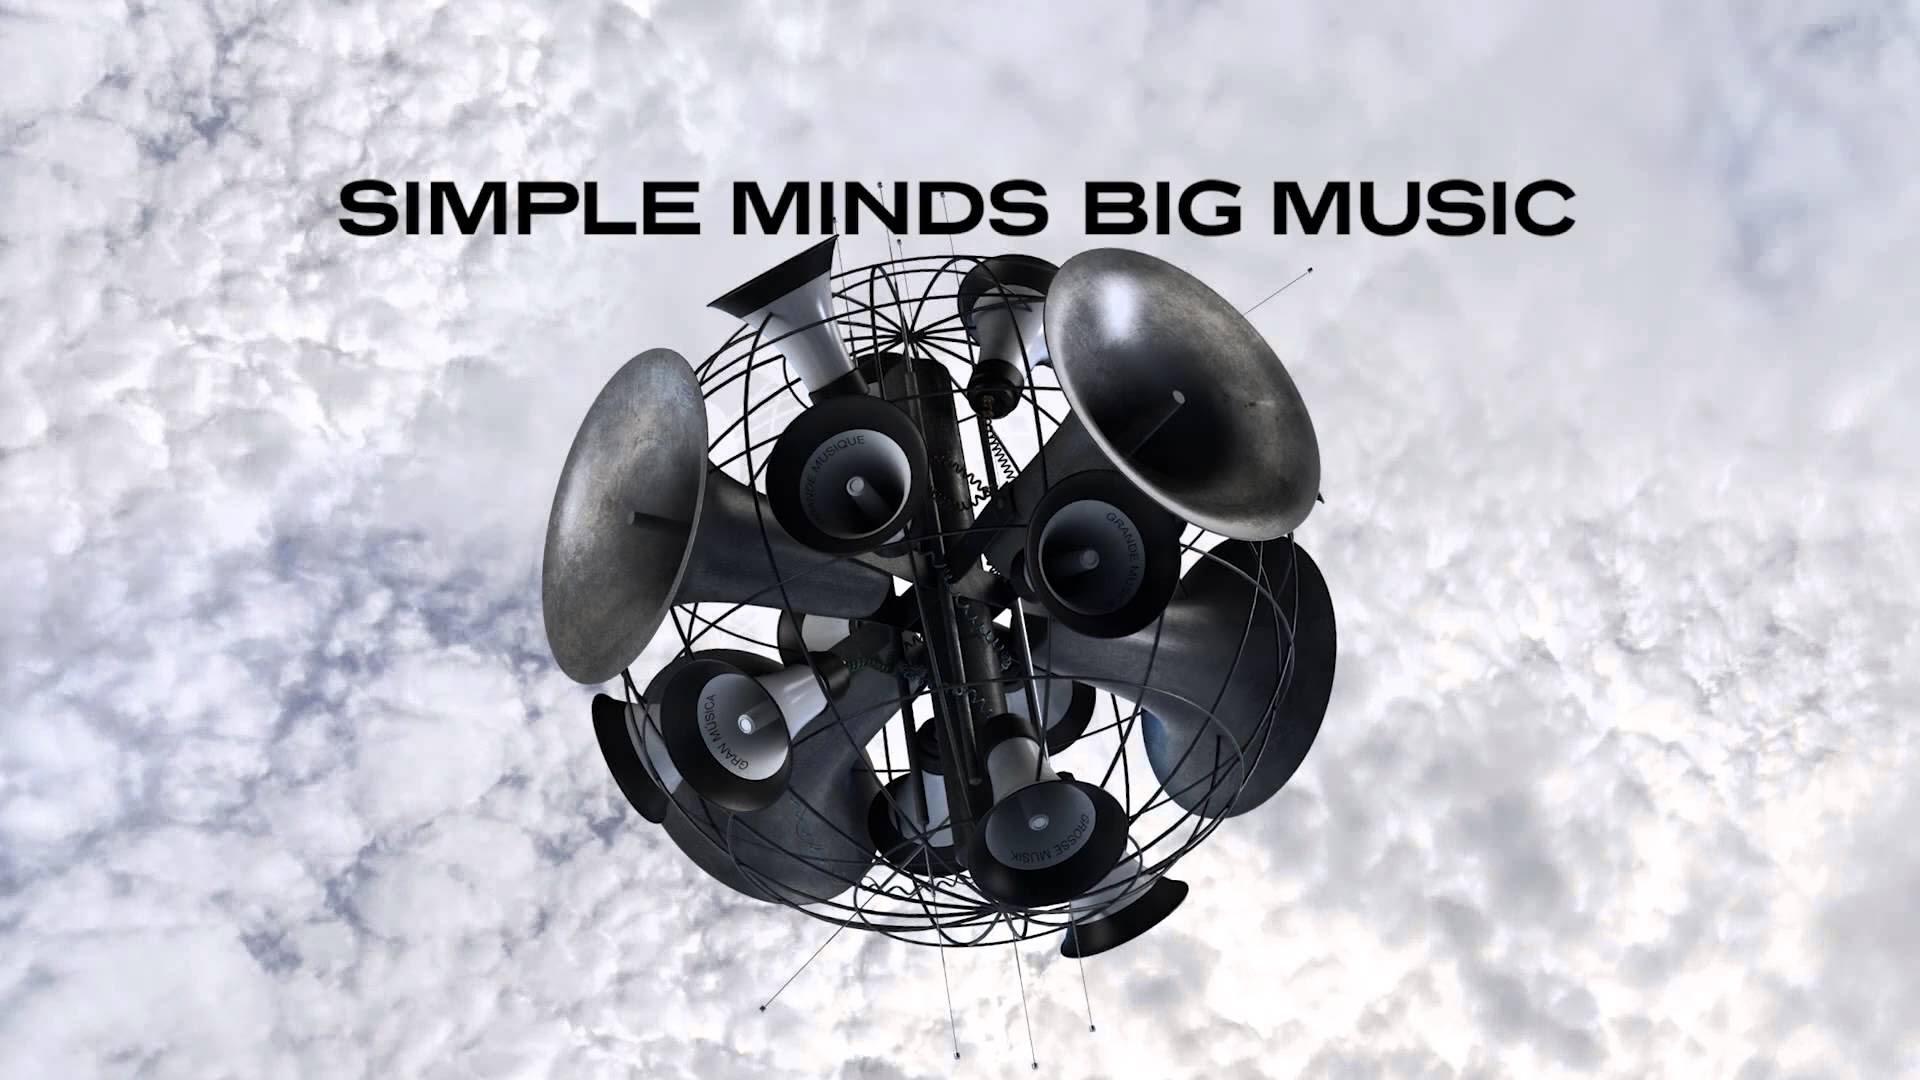 Making 'Big Music' with Simple Minds